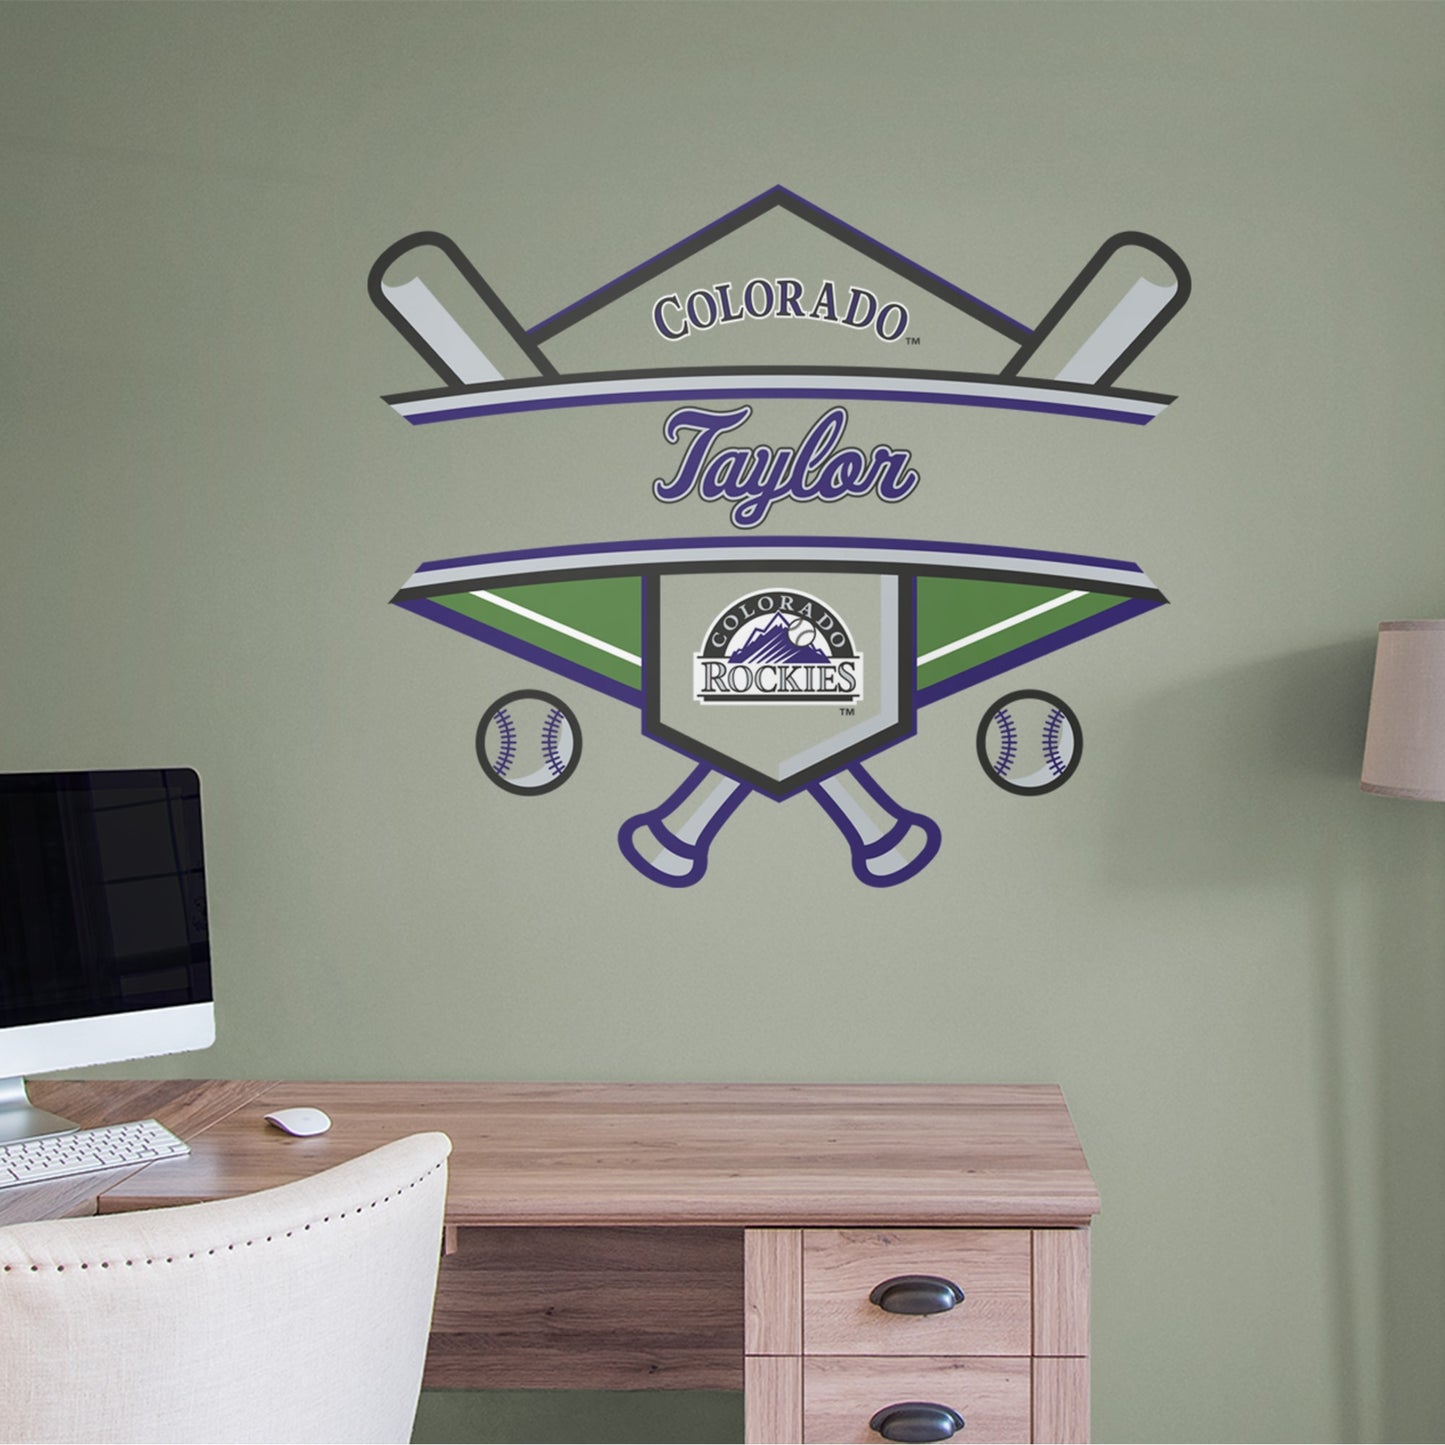 Colorado Rockies: Personalized Name - Officially Licensed MLB Transfer Decal